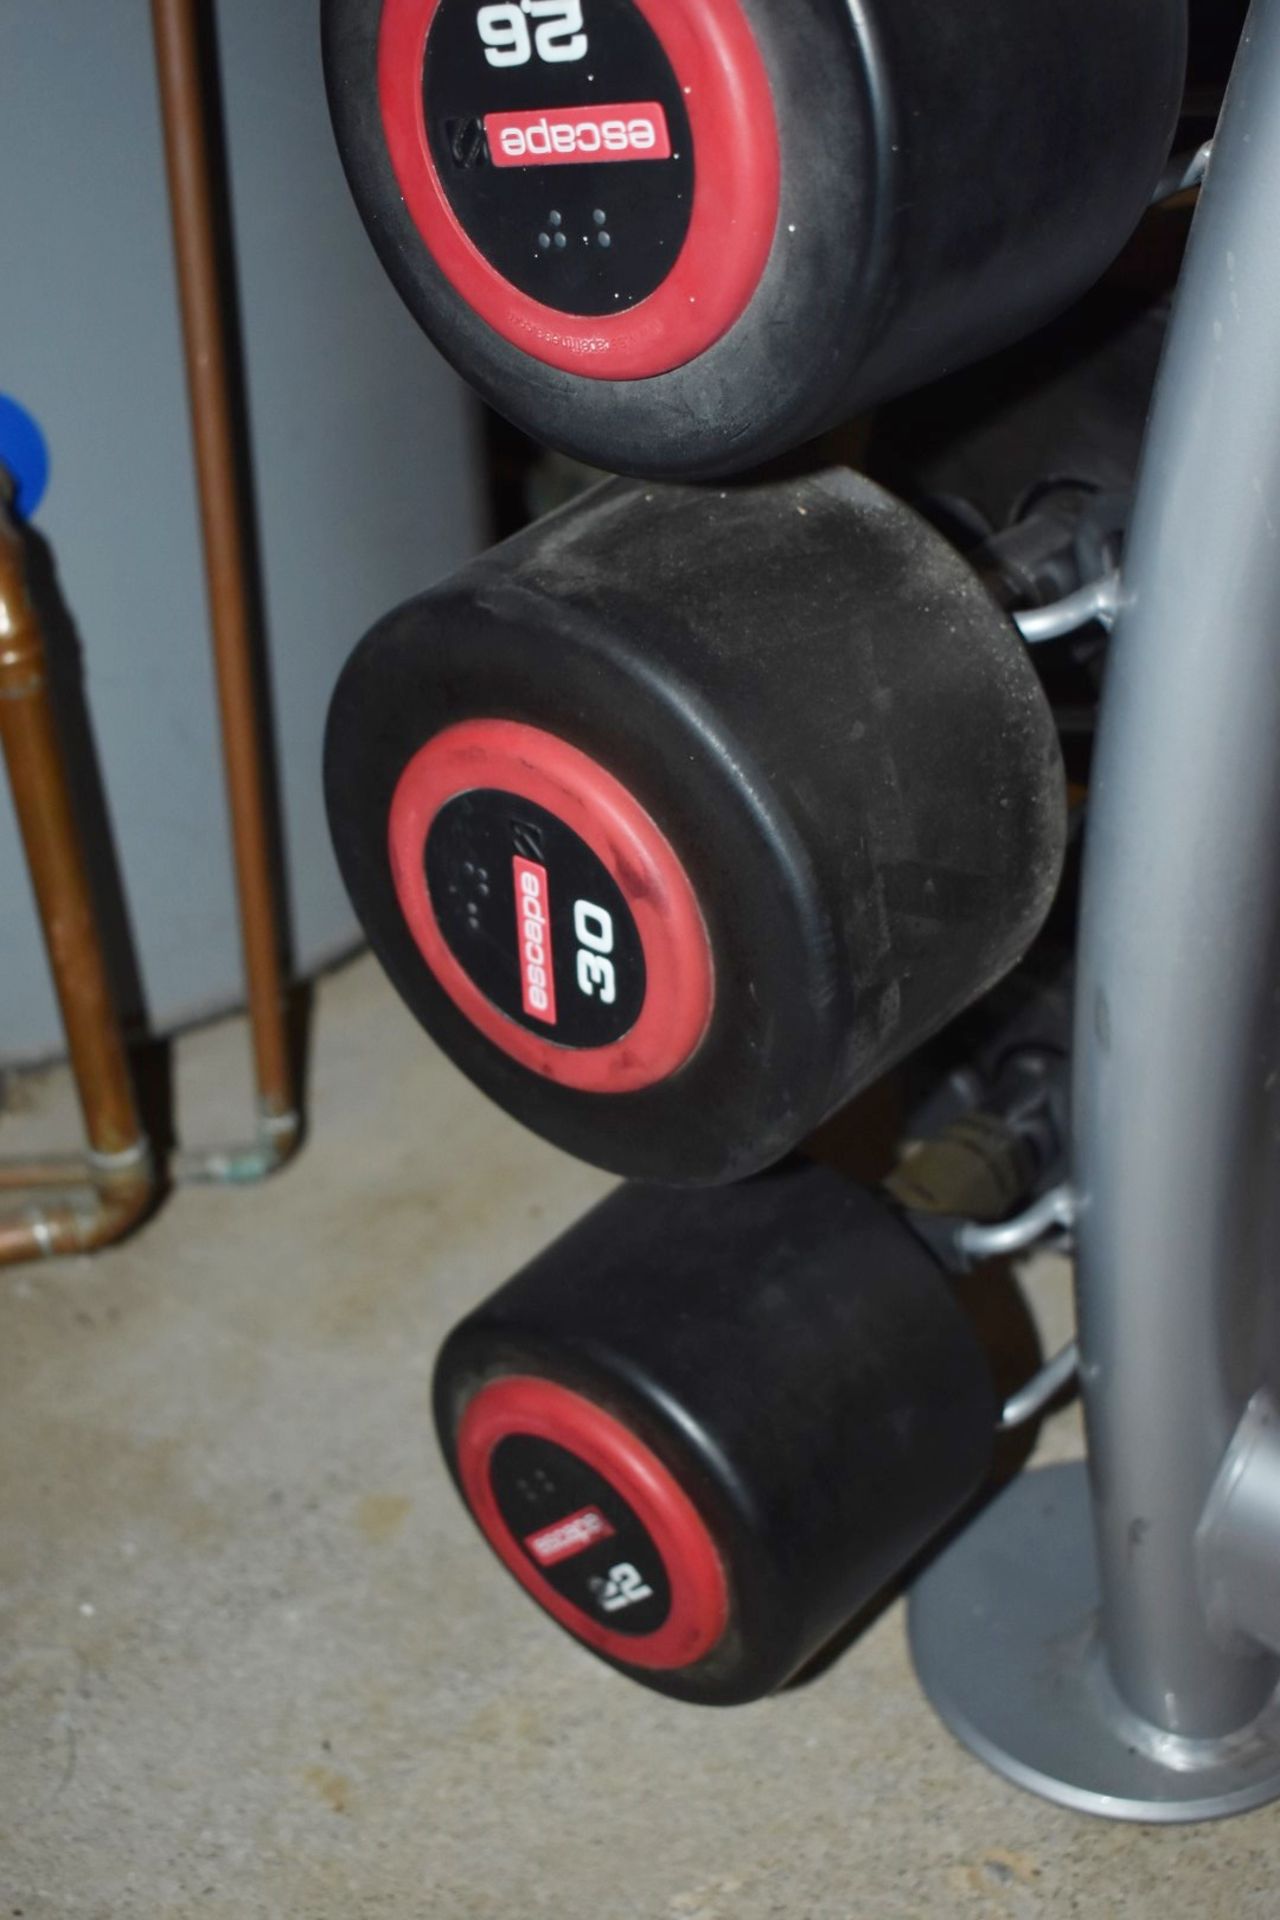 18 x Escape Polyurethane Dumbell Weights - Includes 8kg to 30kg Dumbells and Rubber Dumrbell - Image 6 of 7